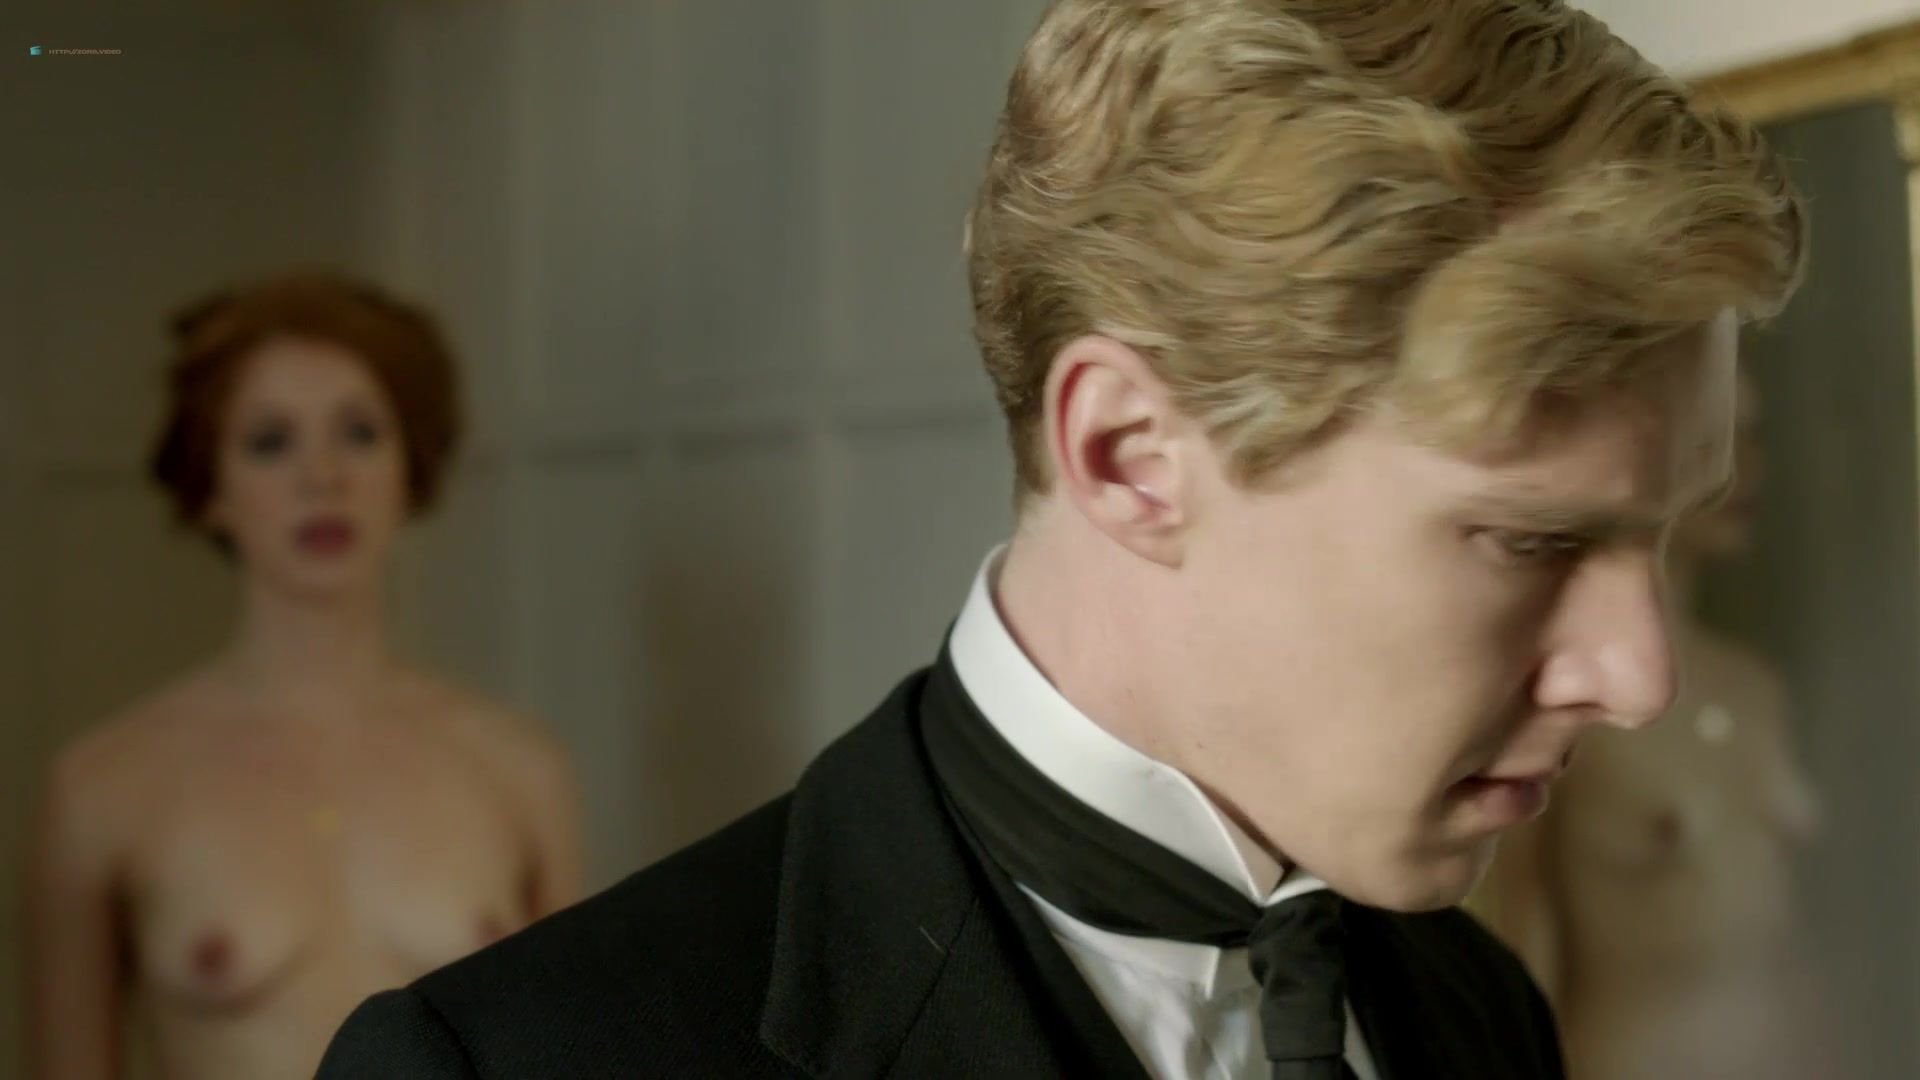 Small Rebecca Hall, Adelaide Clemens nude - Parades End (2012) Stepdaughter